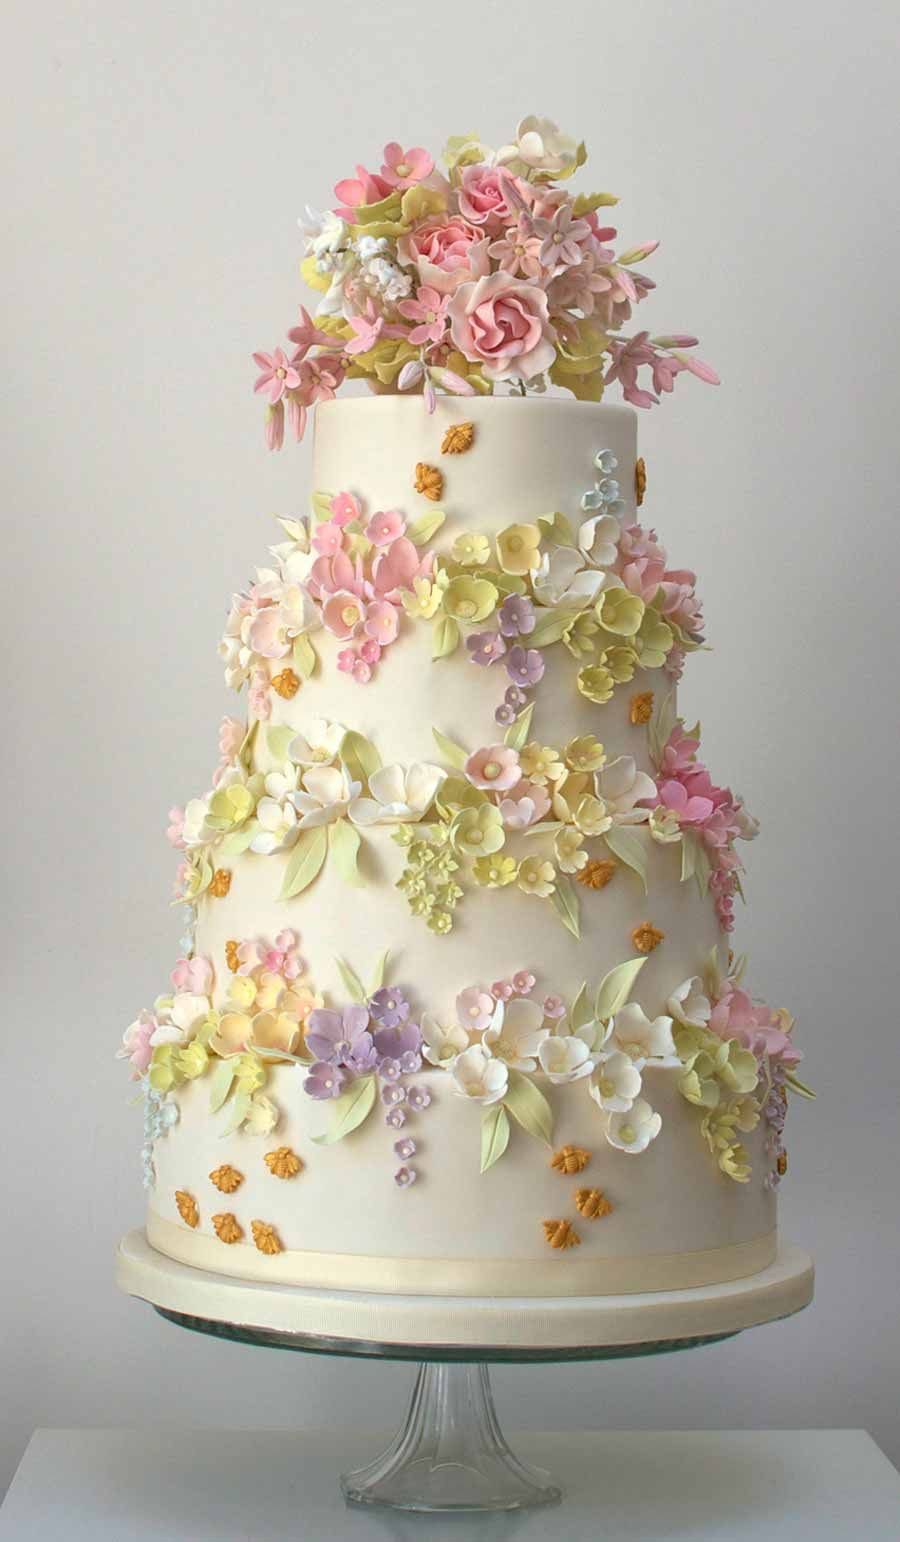 Pictures Of Beautiful Birthday Cakes
 most beautiful birthday cakes in the world Google Search